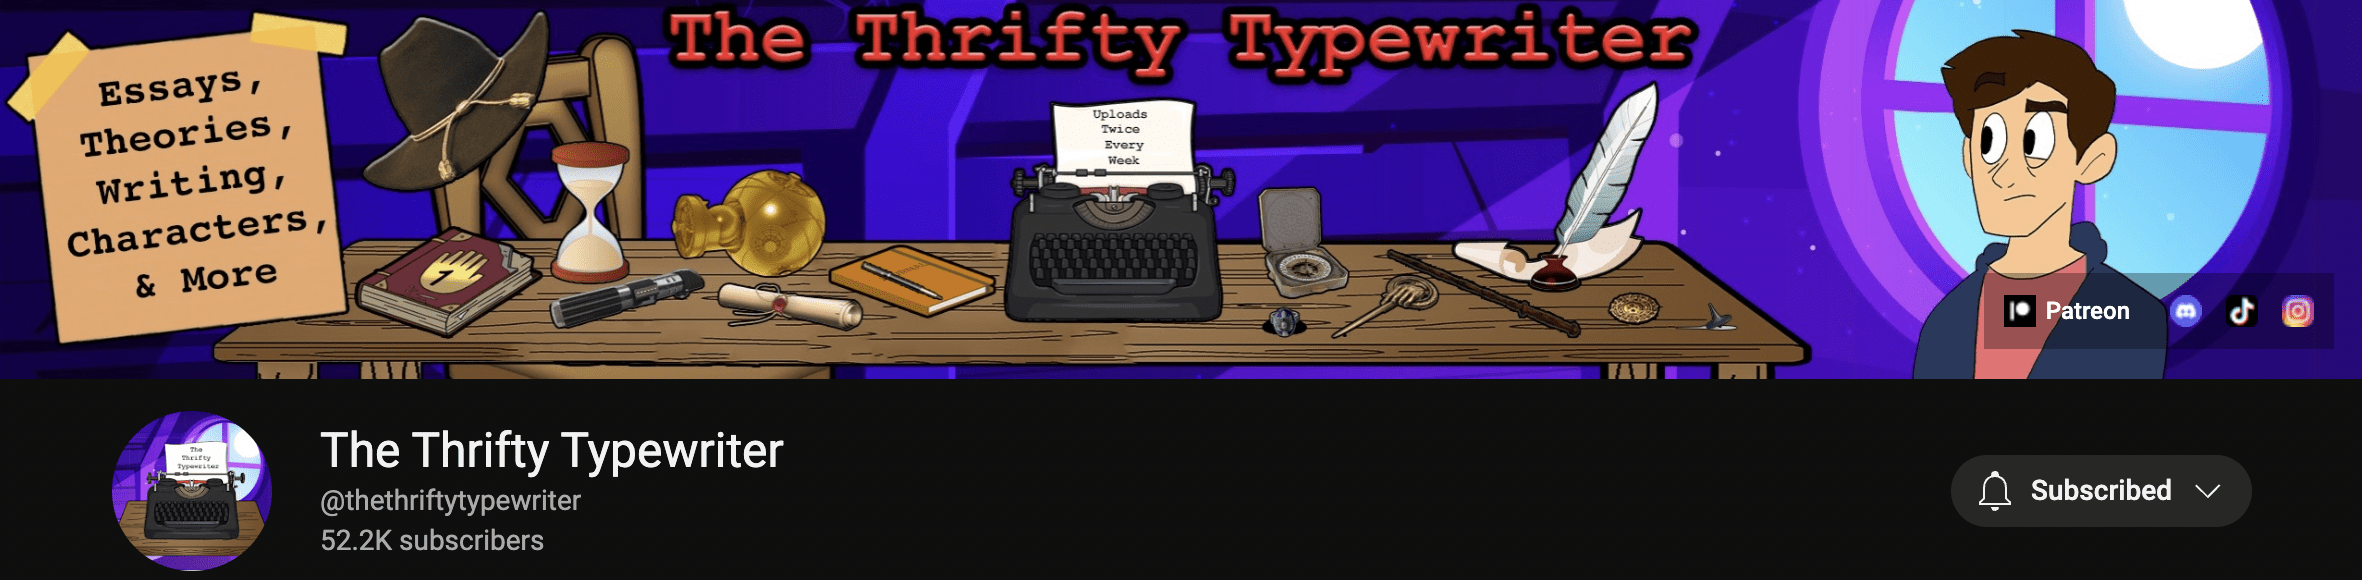 The Thrifty Typewriter Youtube Cover